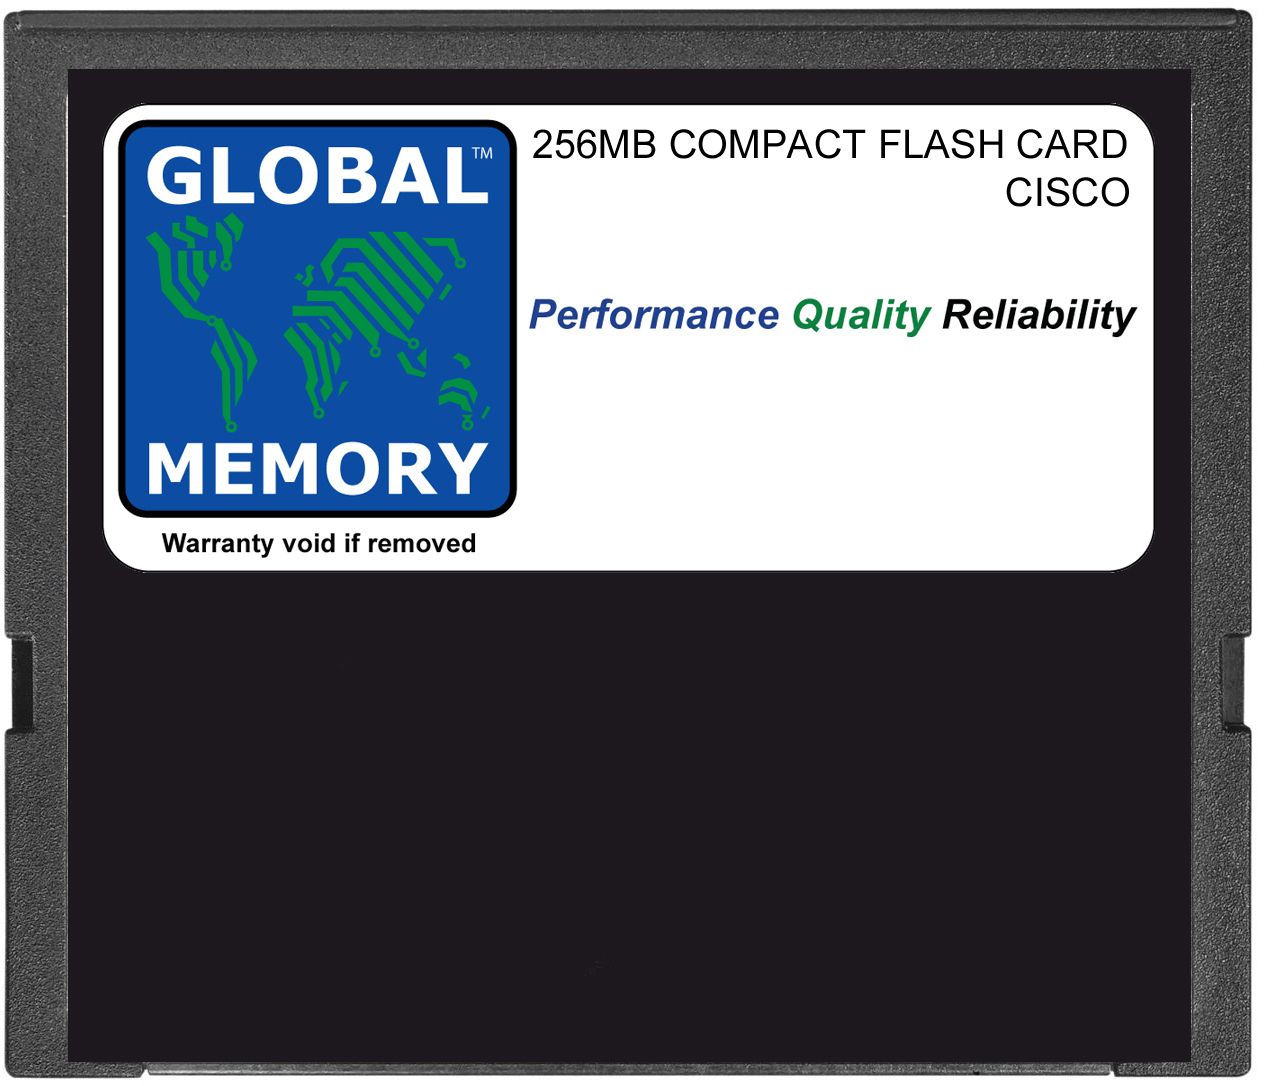 256MB COMPACT FLASH CARD MEMORY FOR CISCO 7304 ROUTERS NSE-100 / 7304 ROUTERS NPE-G100 (7300-I/O-CFM-256M)